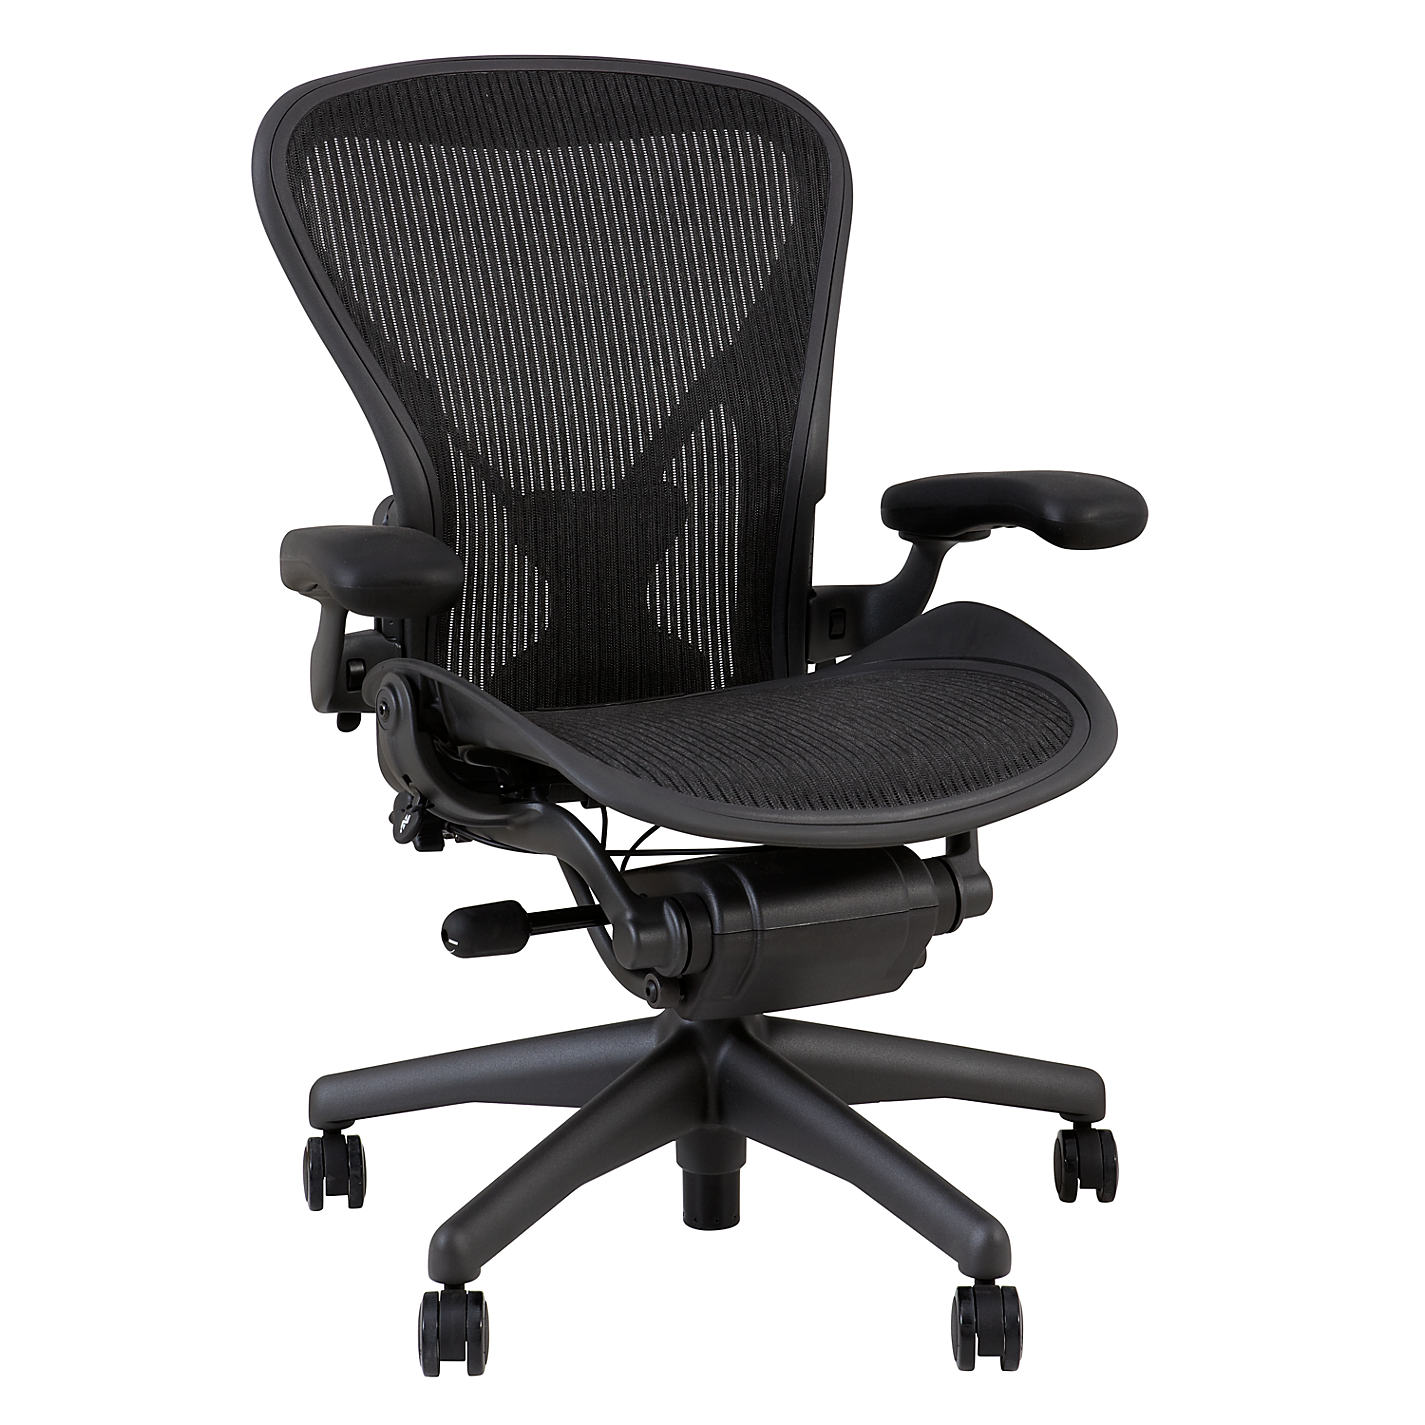 Herman Miller Aeron Chairs: Exclusive and Extremely Comfortable Chairs